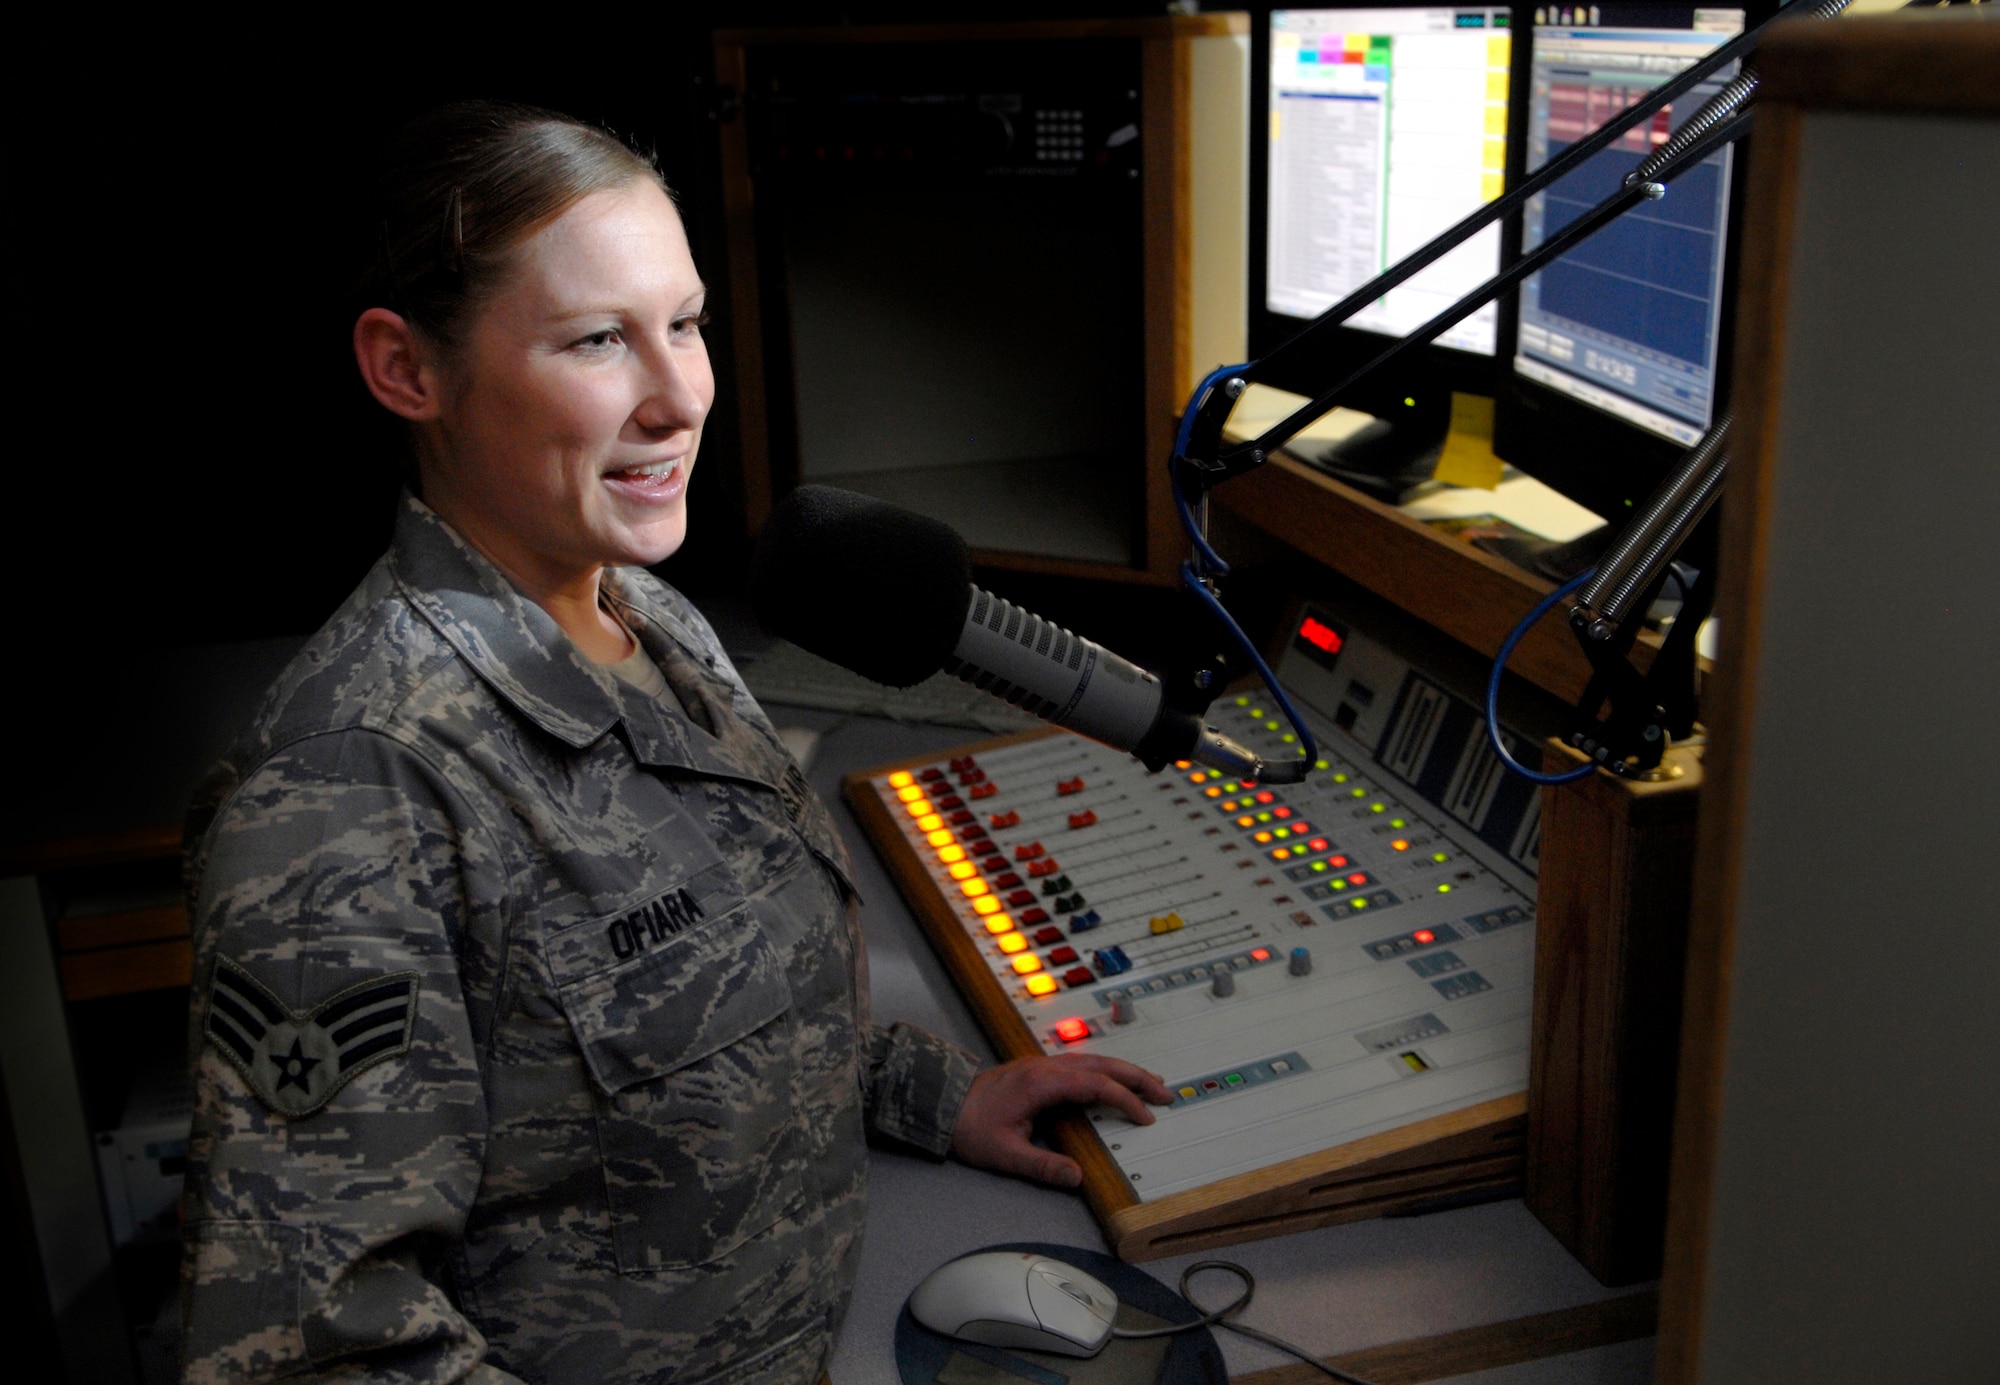 Senior Airman Shannon Ofiara informs listeners of events around the Republic of Korea as she broadcasts a radio show at American Forces Network, Osan. (U.S. Air Force photo/Staff Sgt. Brian Ferguson)  